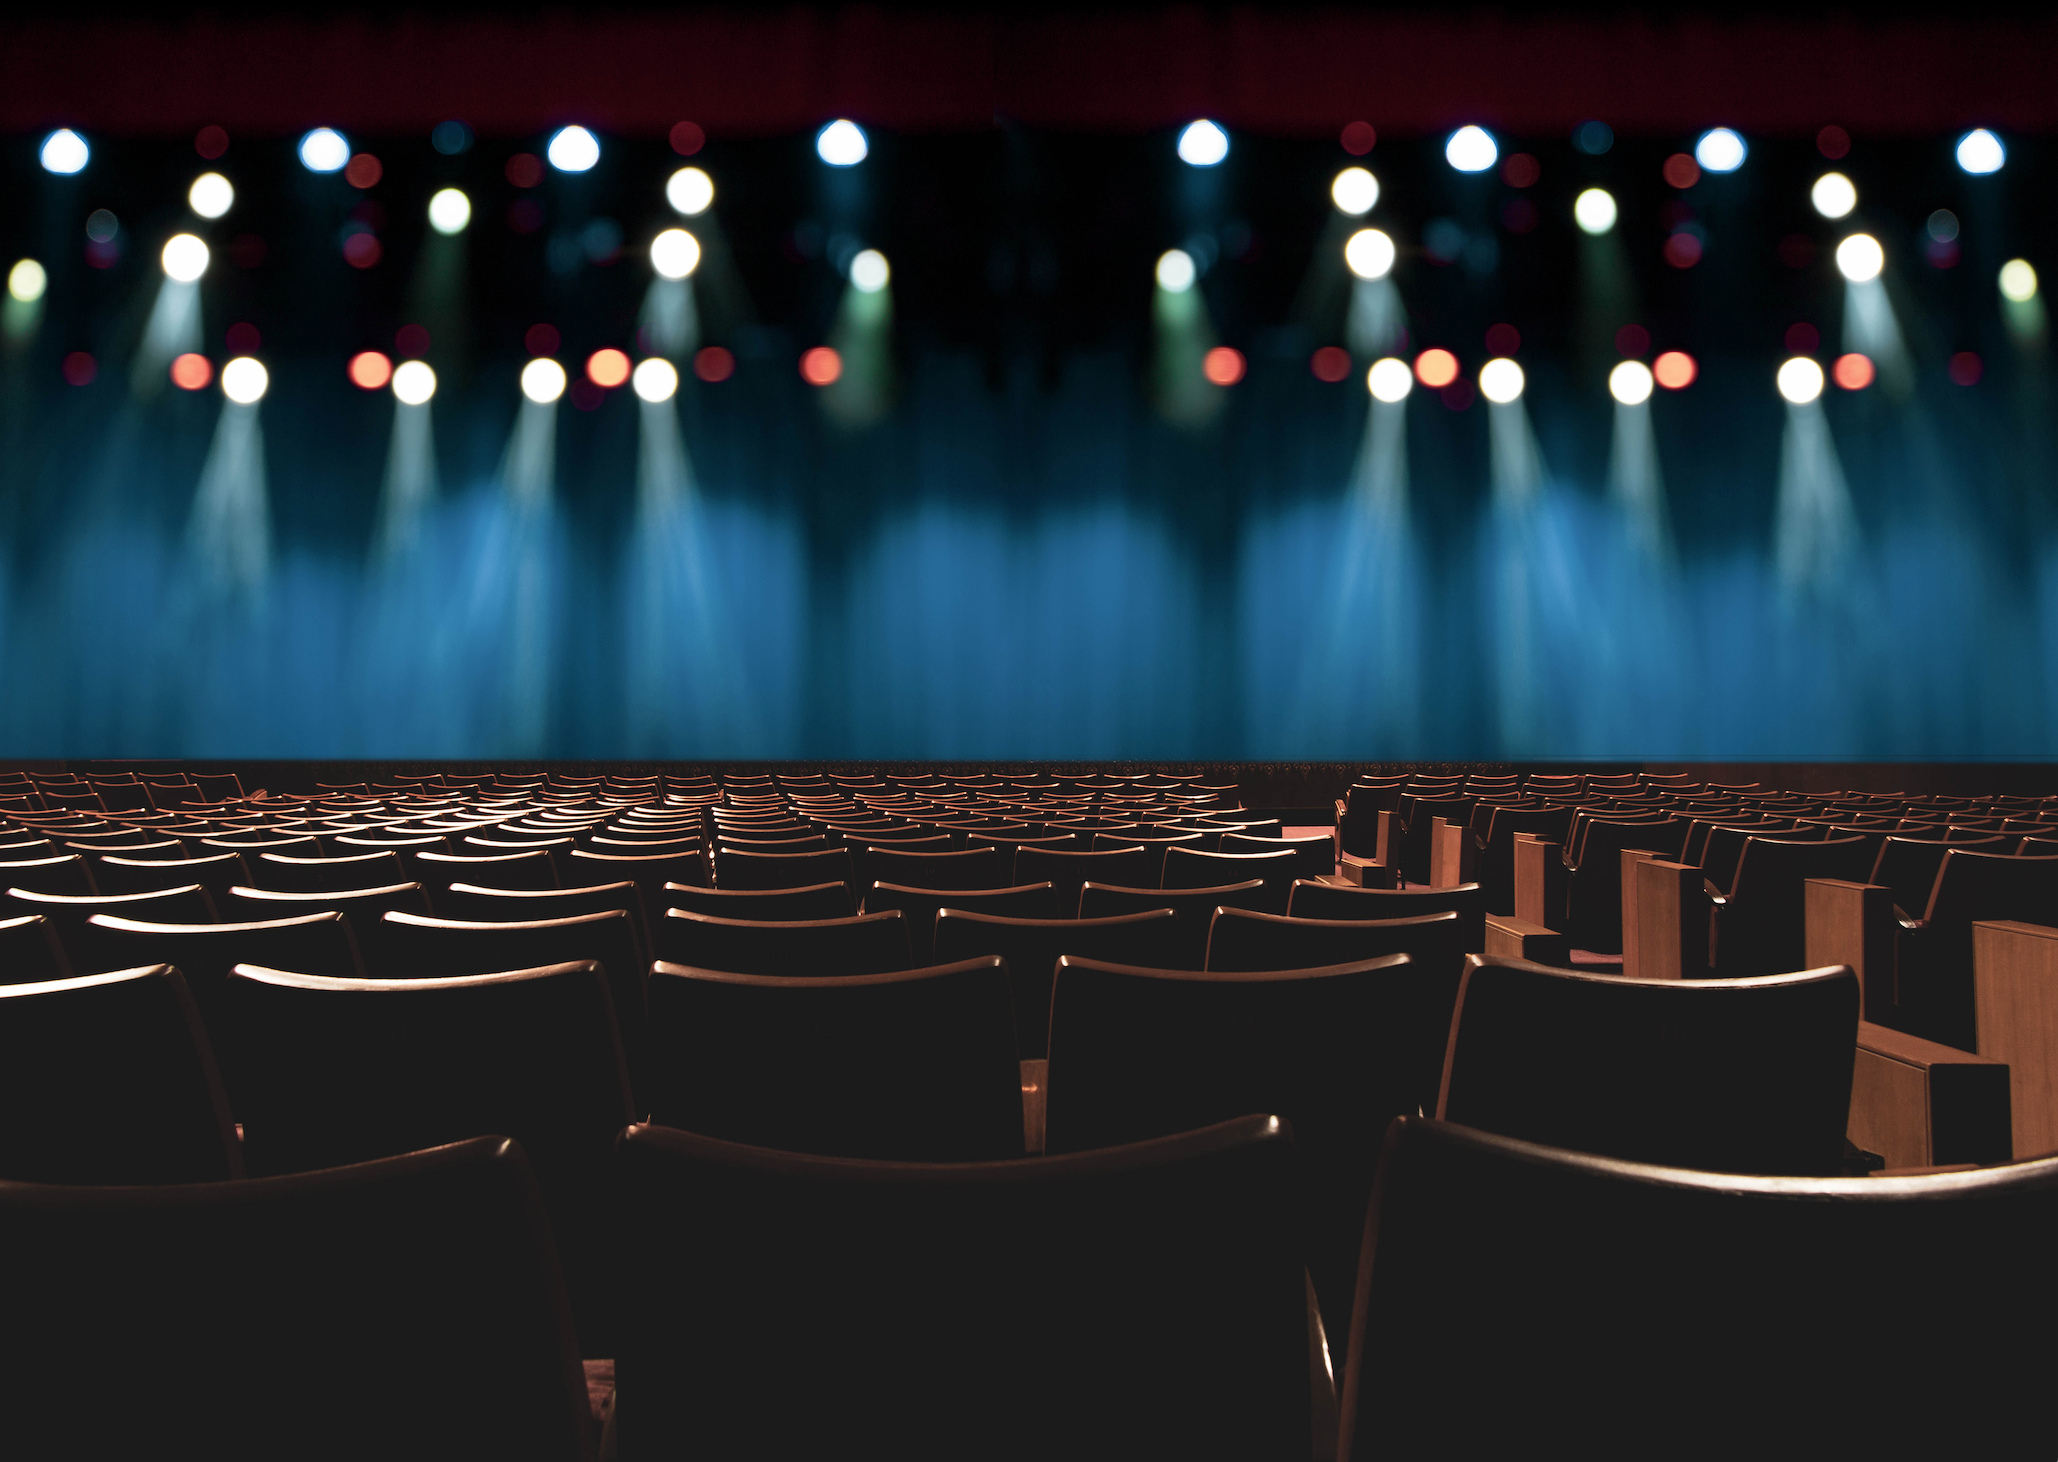 Empty rows of wooden theater seats looking onto a stage with blue lighting and white spotlights.